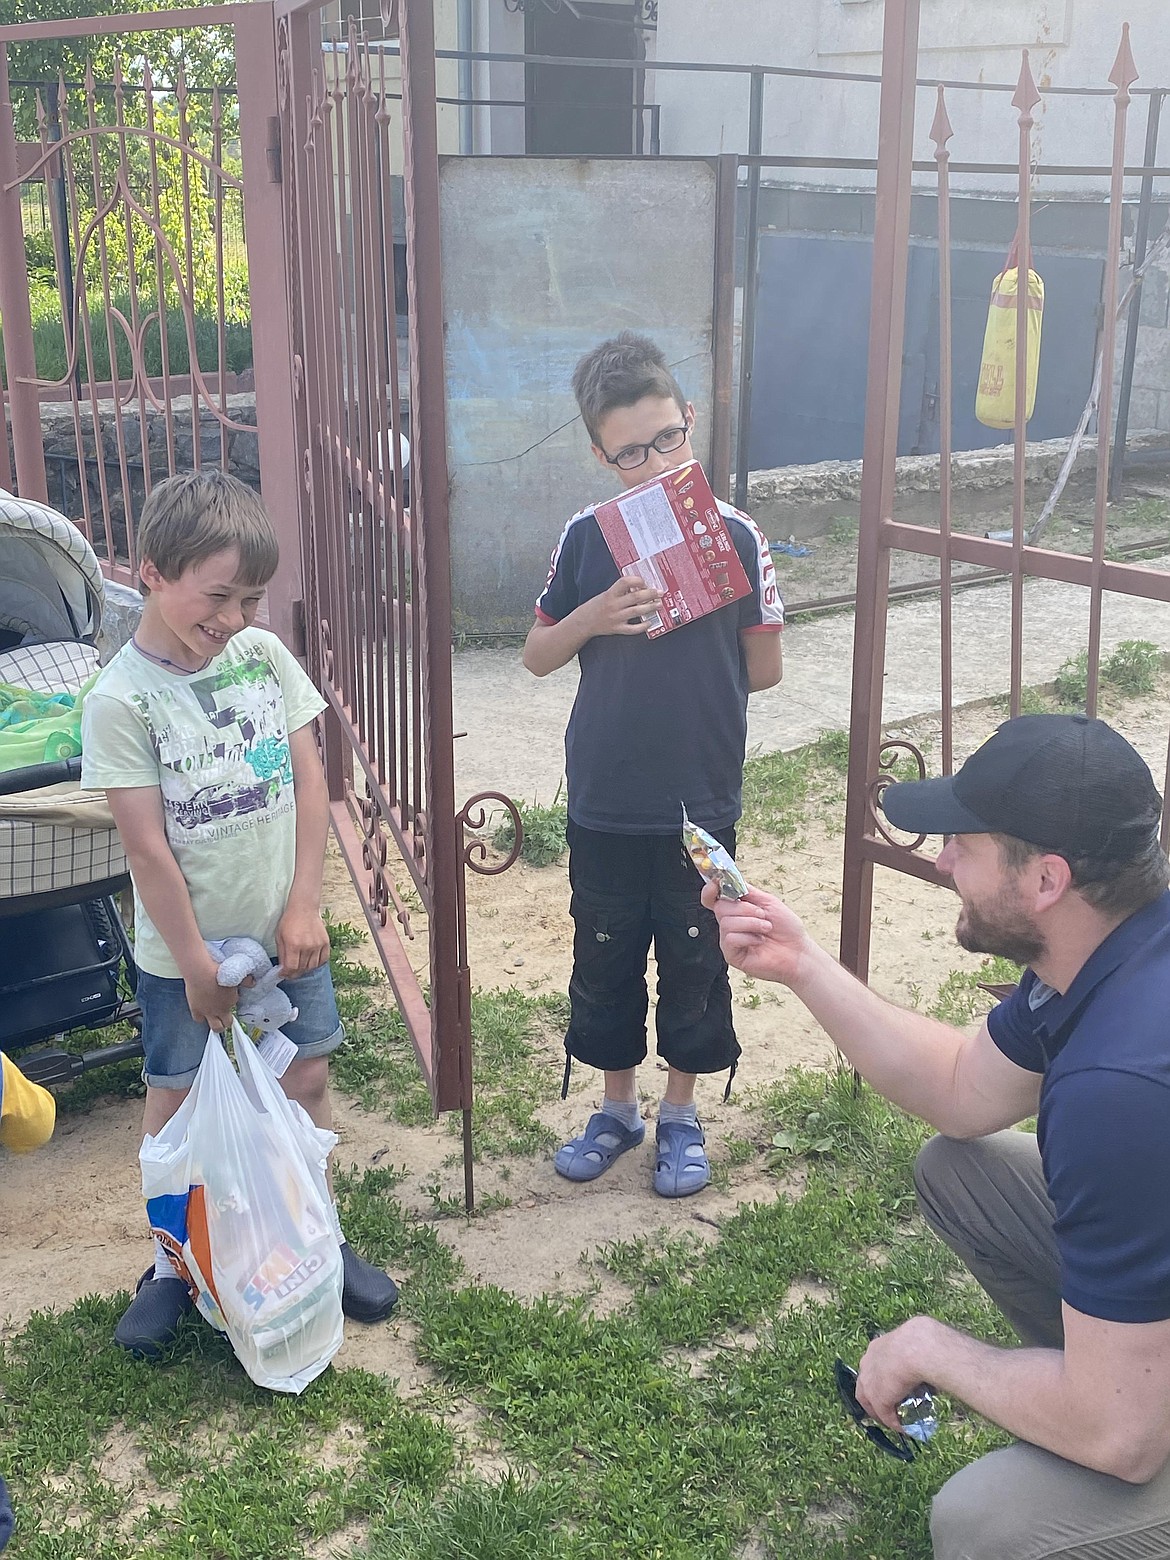 Jared Malone, a Heritage Health counselor, offers candy to a child in Ukraine.